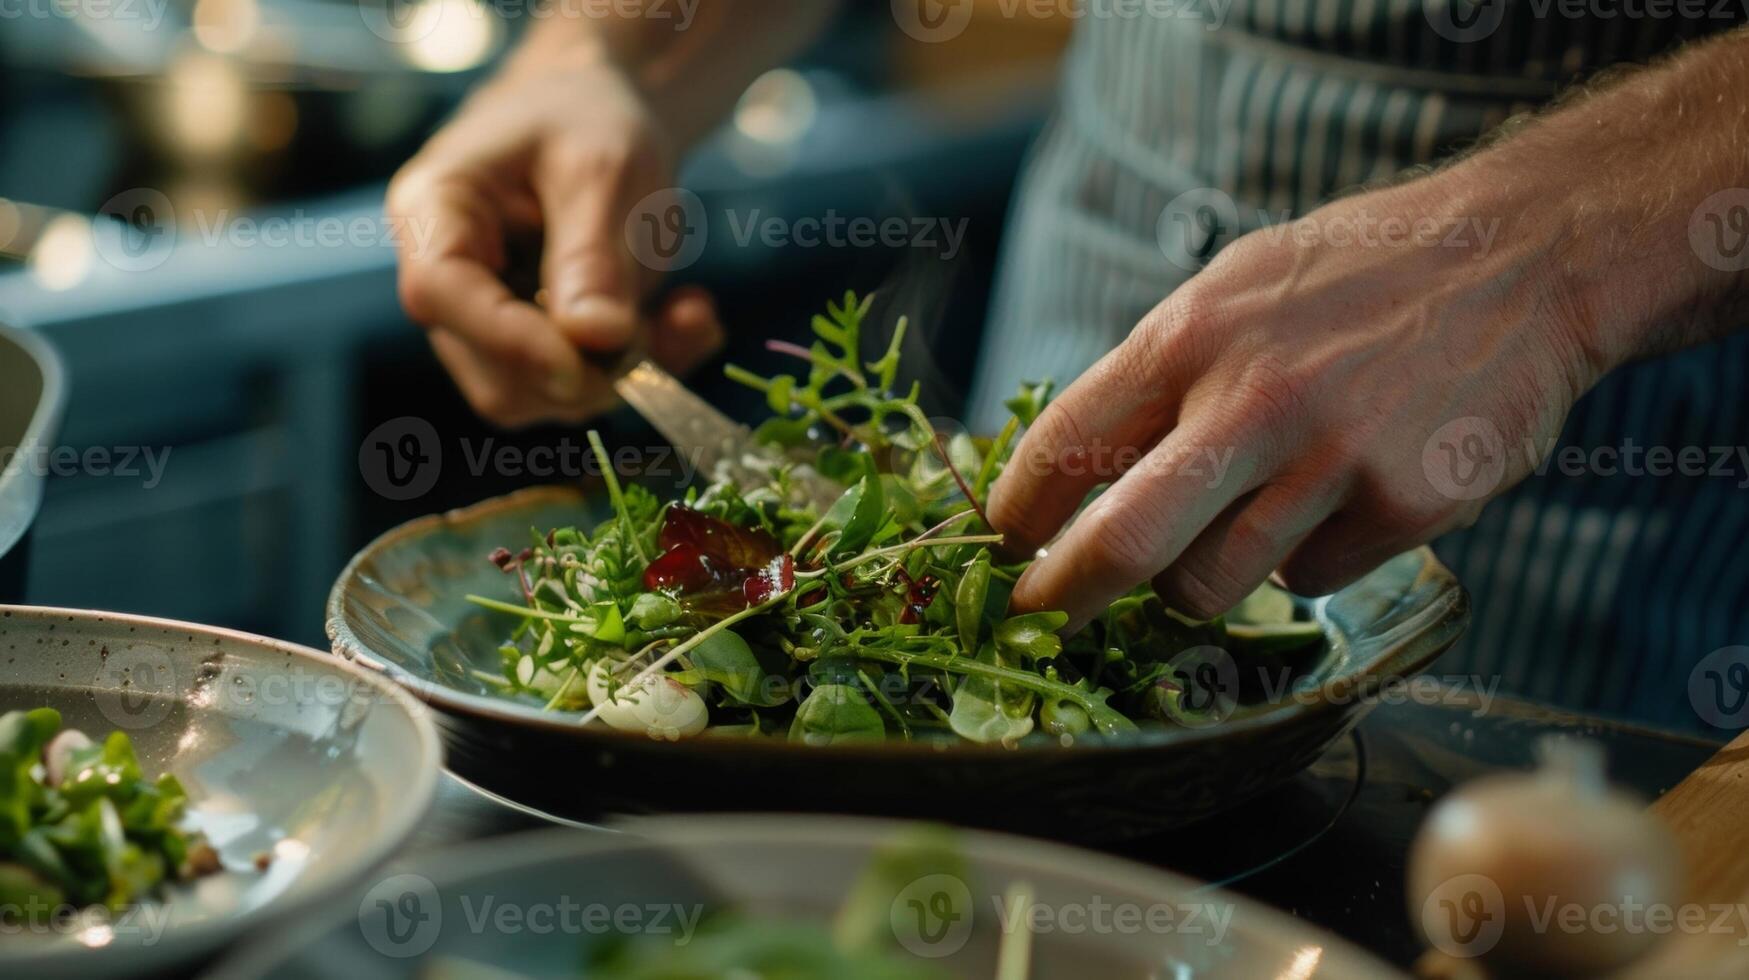 The demonstrator showcases how simple and straightforward cooking with local ingredients can be encouraging the audience to try recreating the dish at home photo